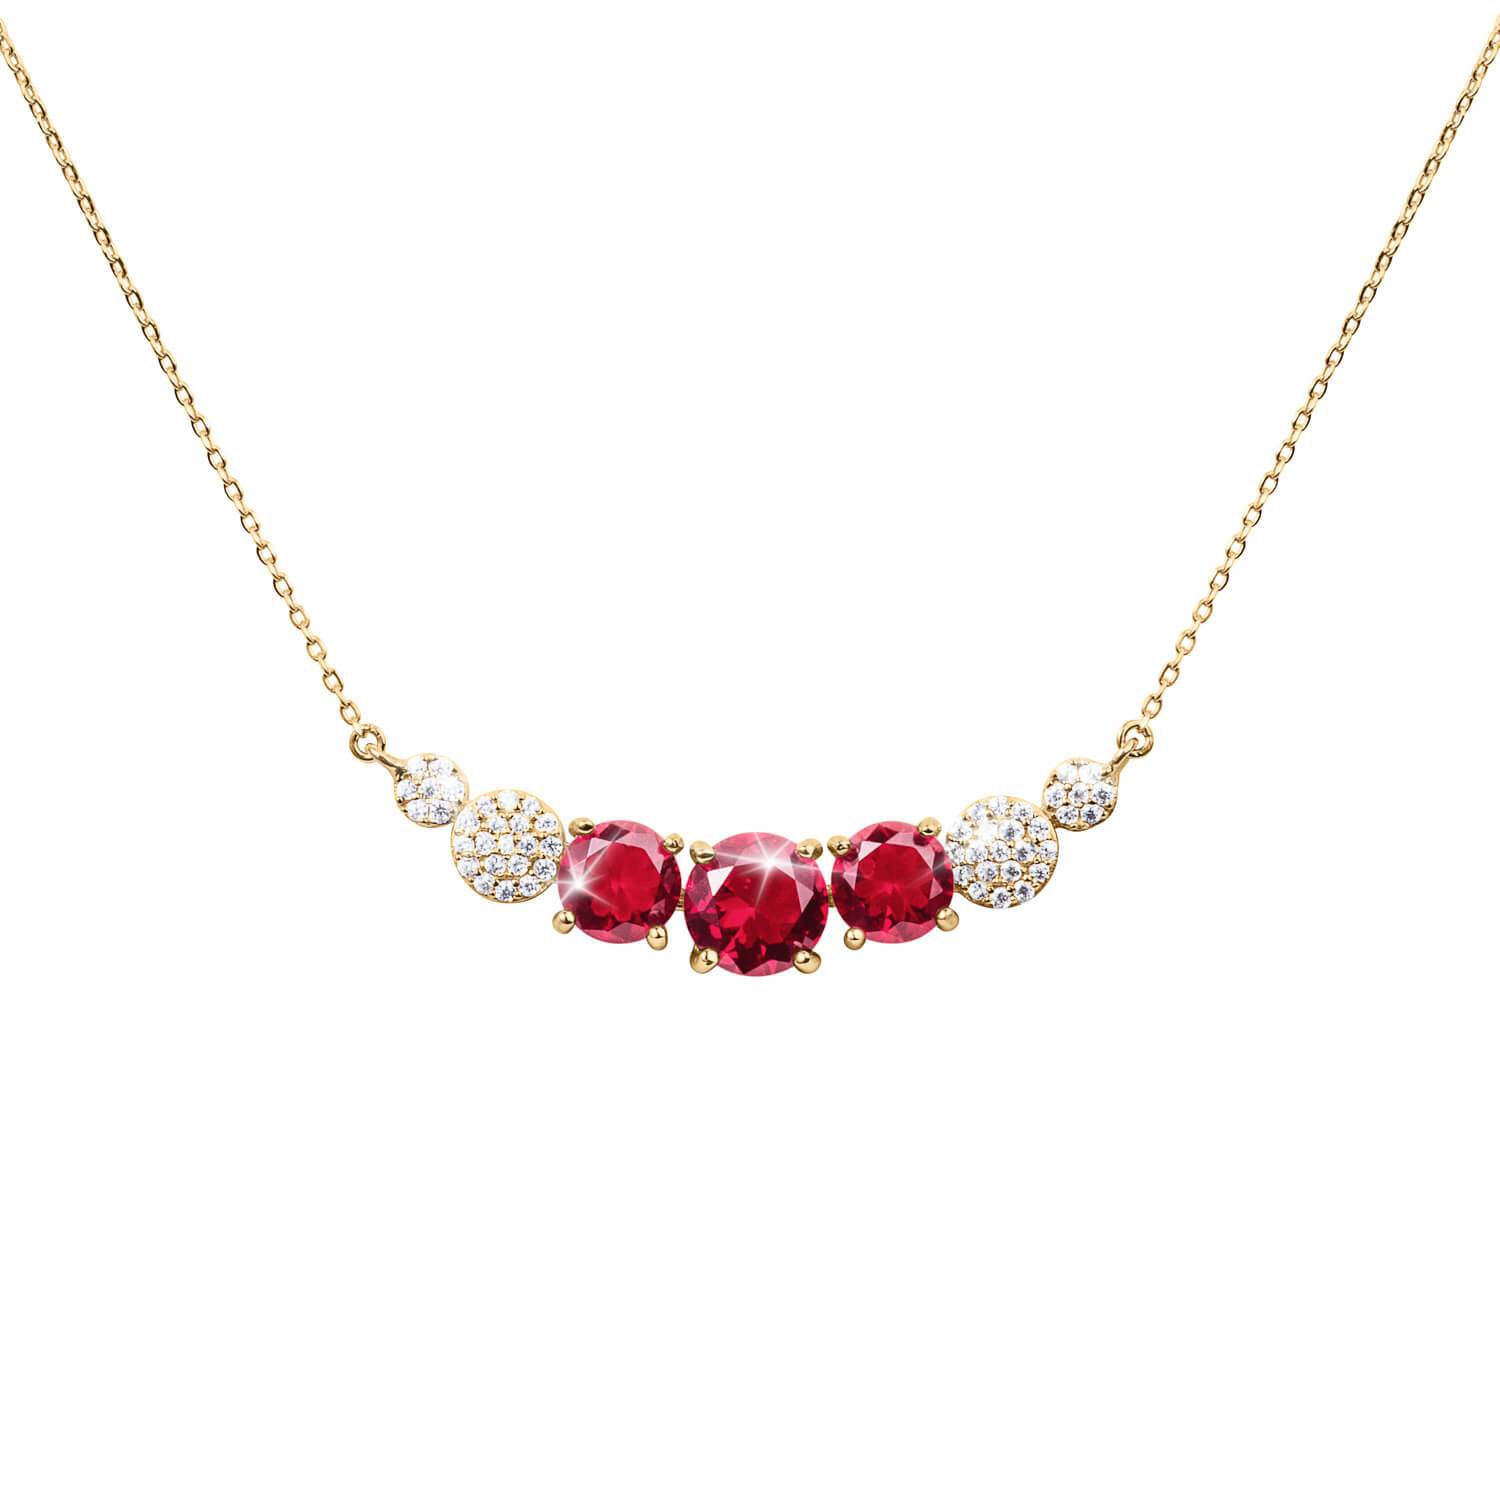 Candy Cherry Red Necklace – Timepieces International